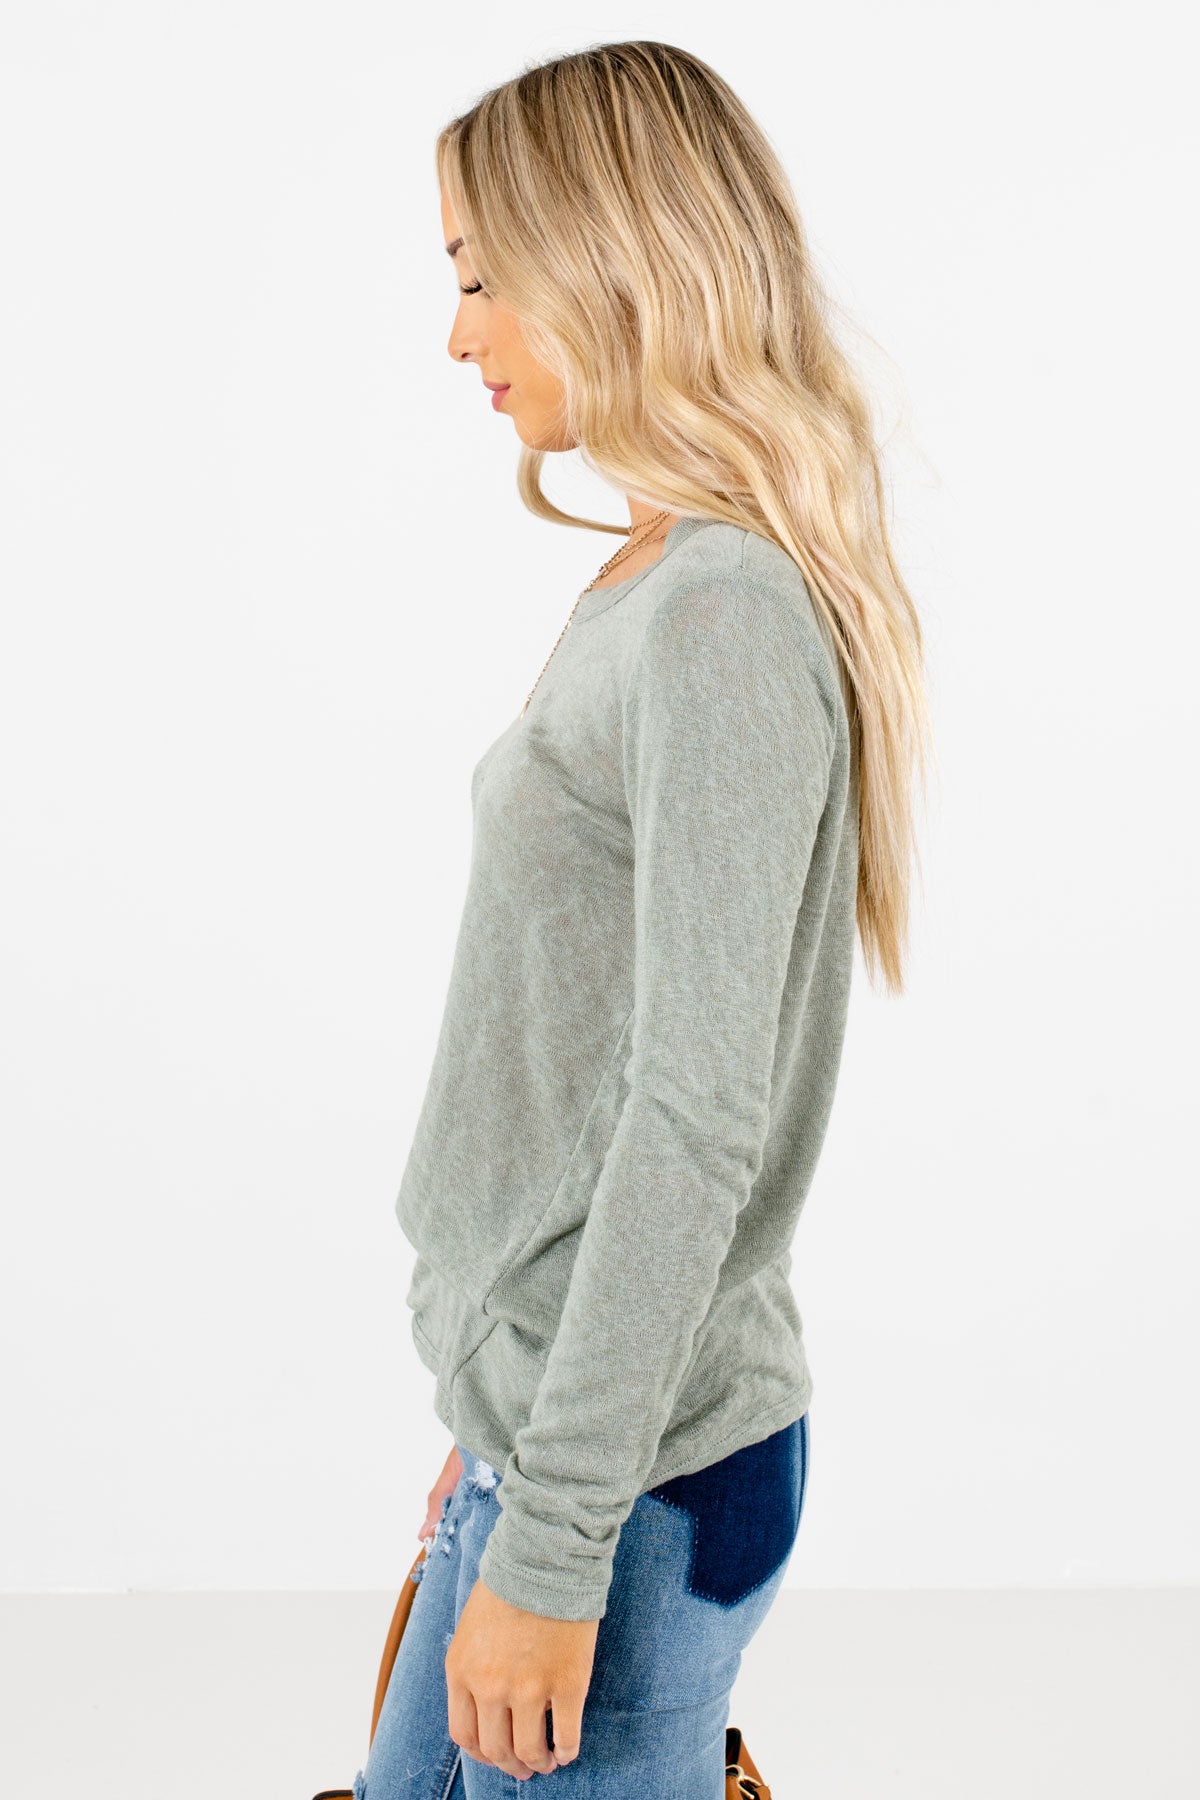 Sage Green Long Sleeve Boutique Tops for Women